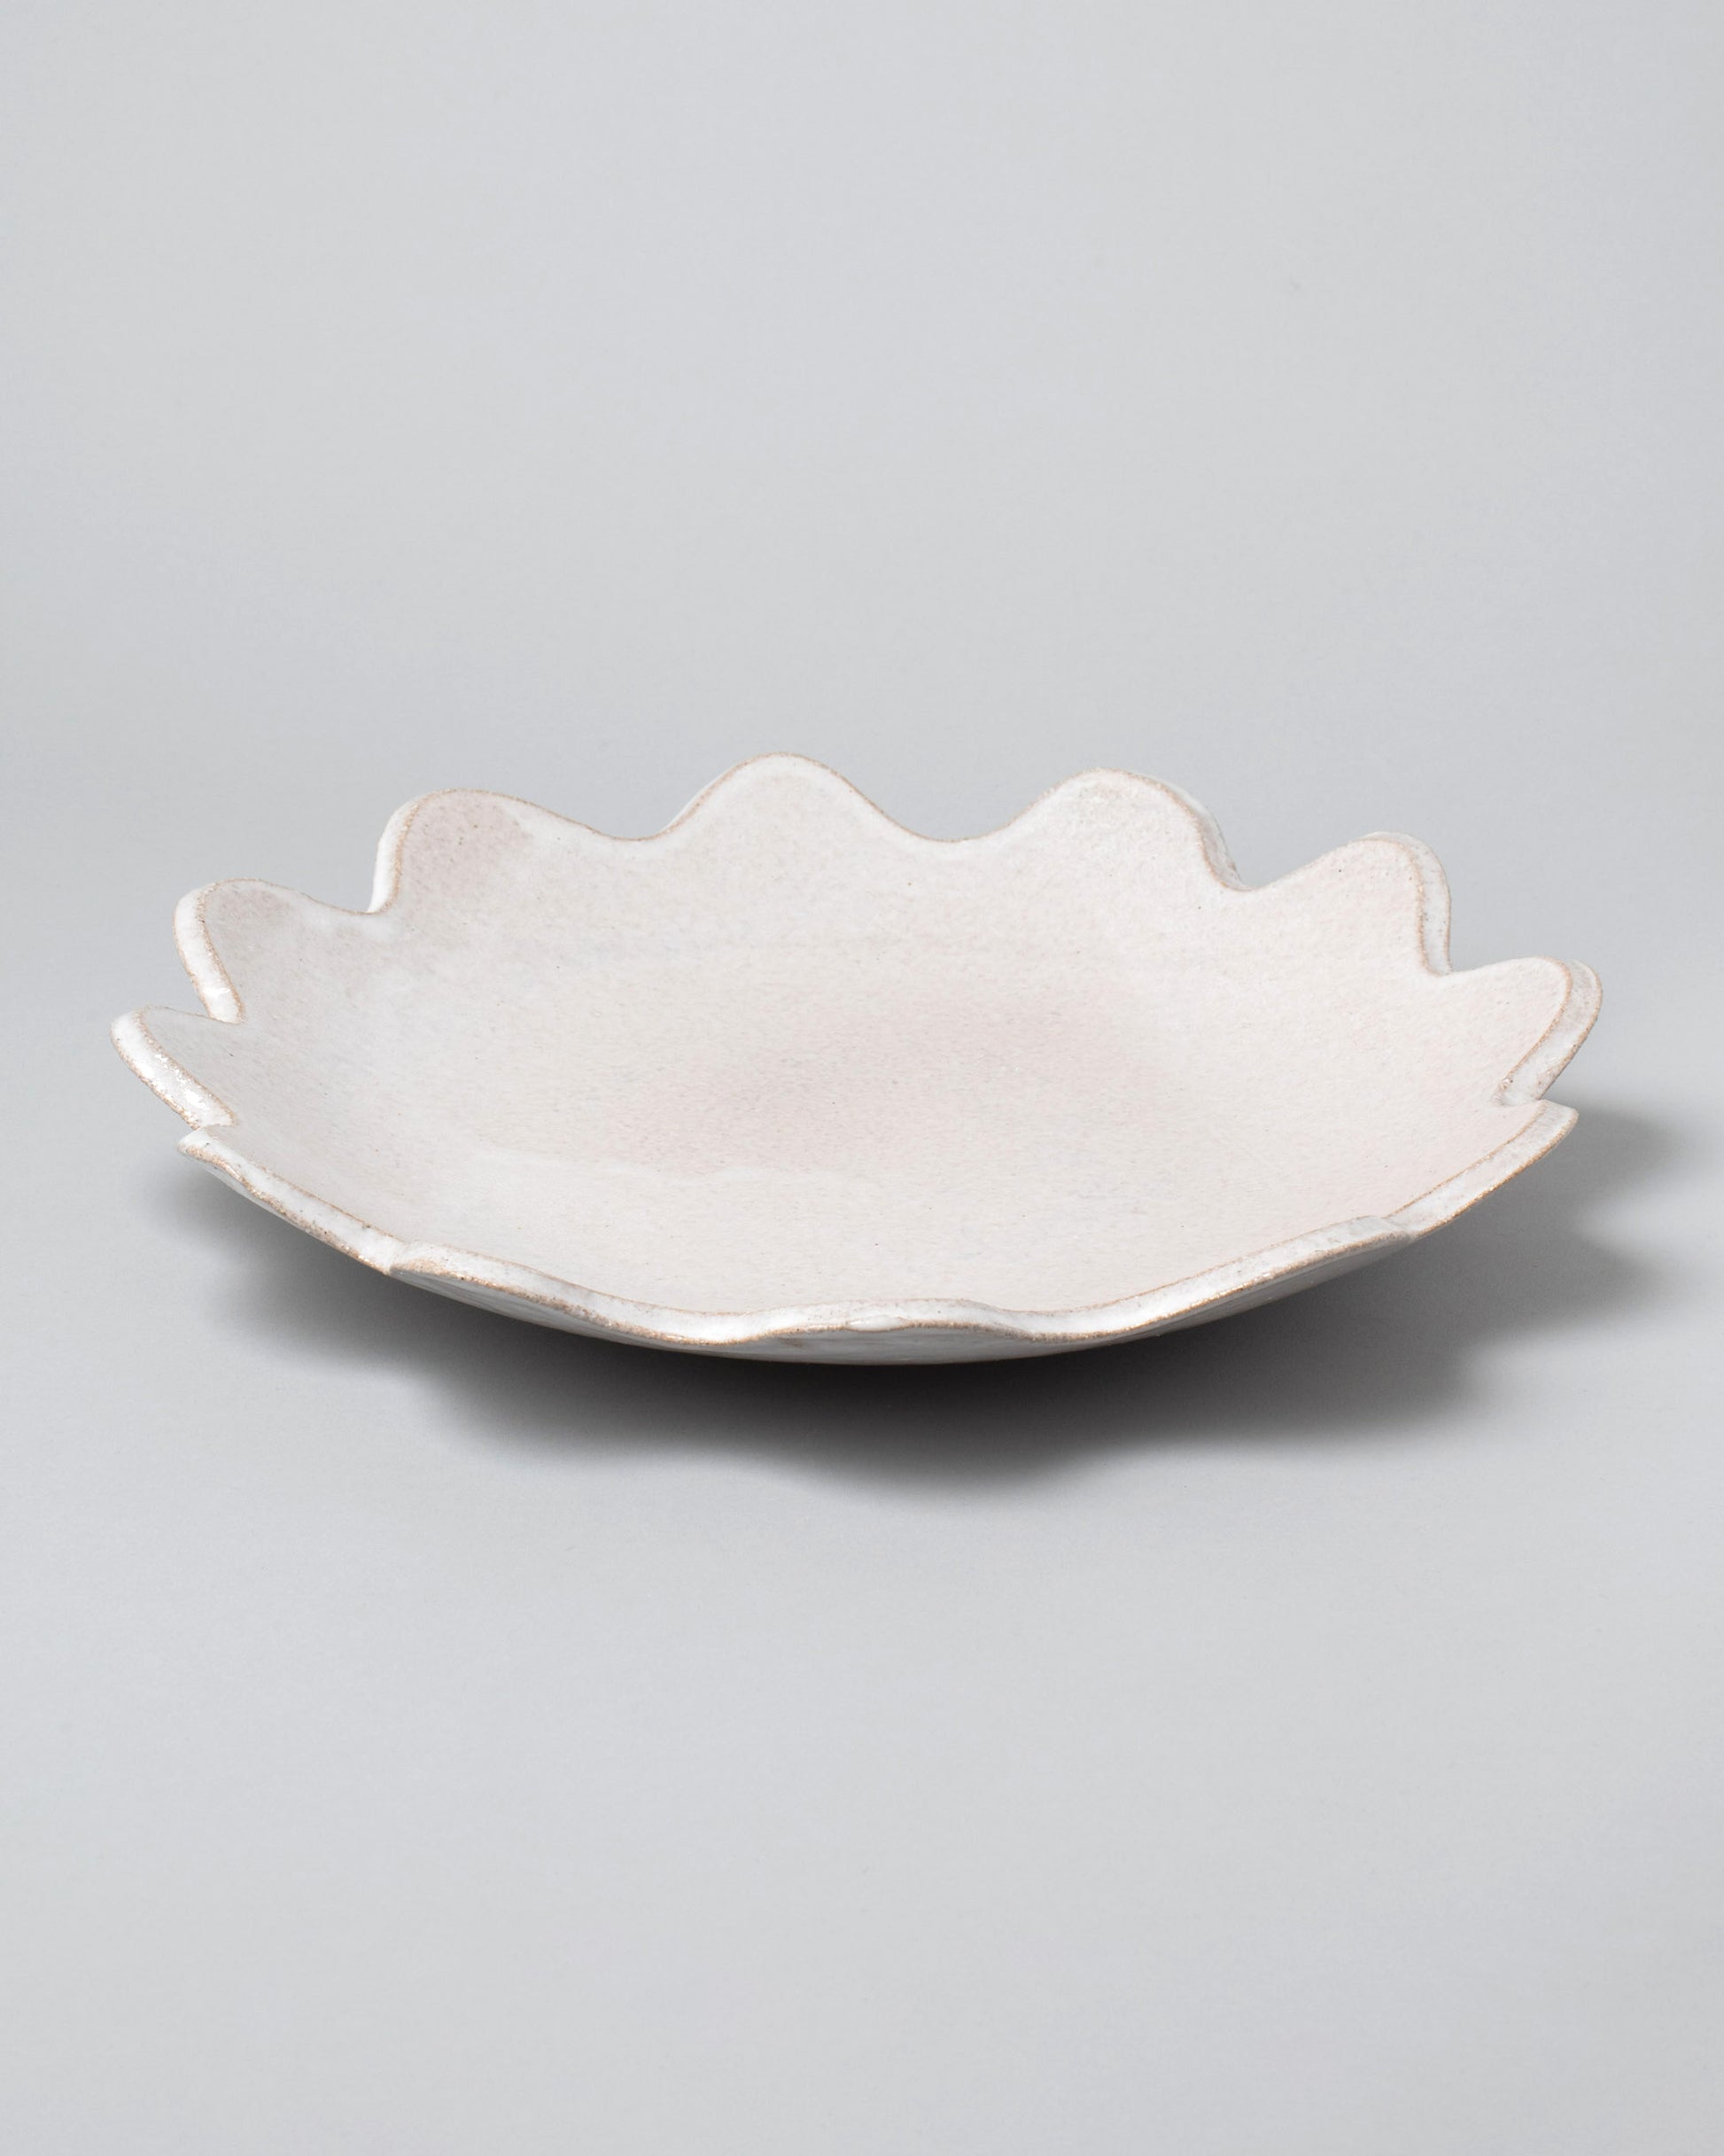 Morgan Peck Pearl Scallop Platter on light color background.